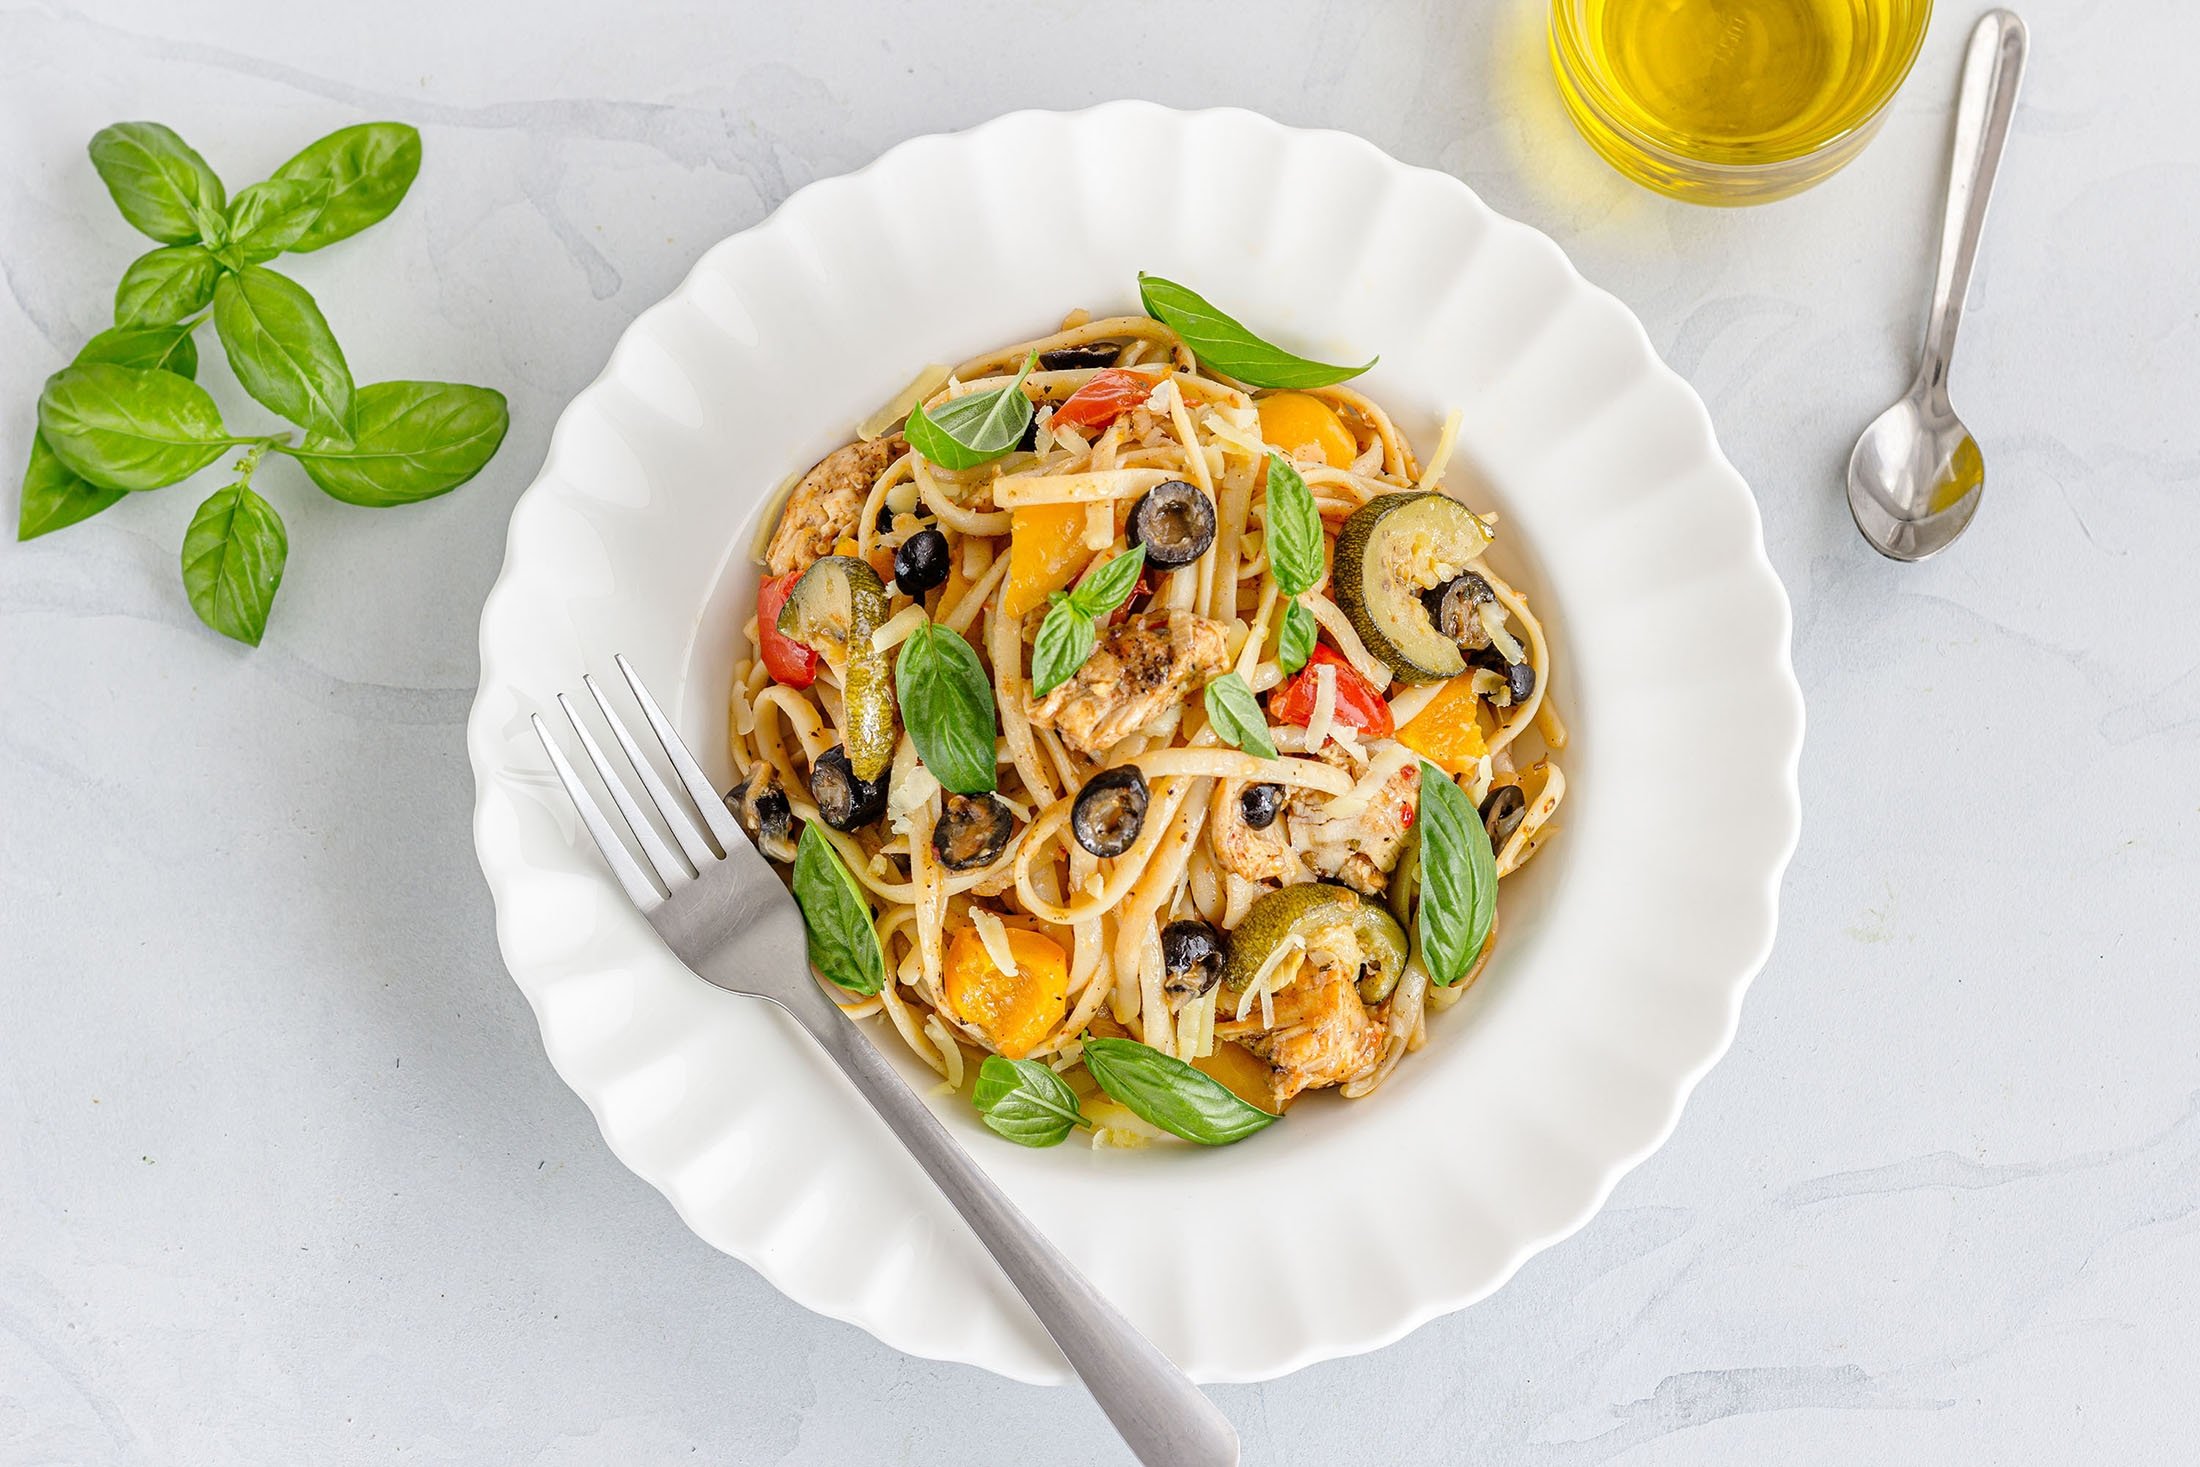 Throw together some leftover chicken and veggies for a quick dinner solution. (Shutterstock Photo)